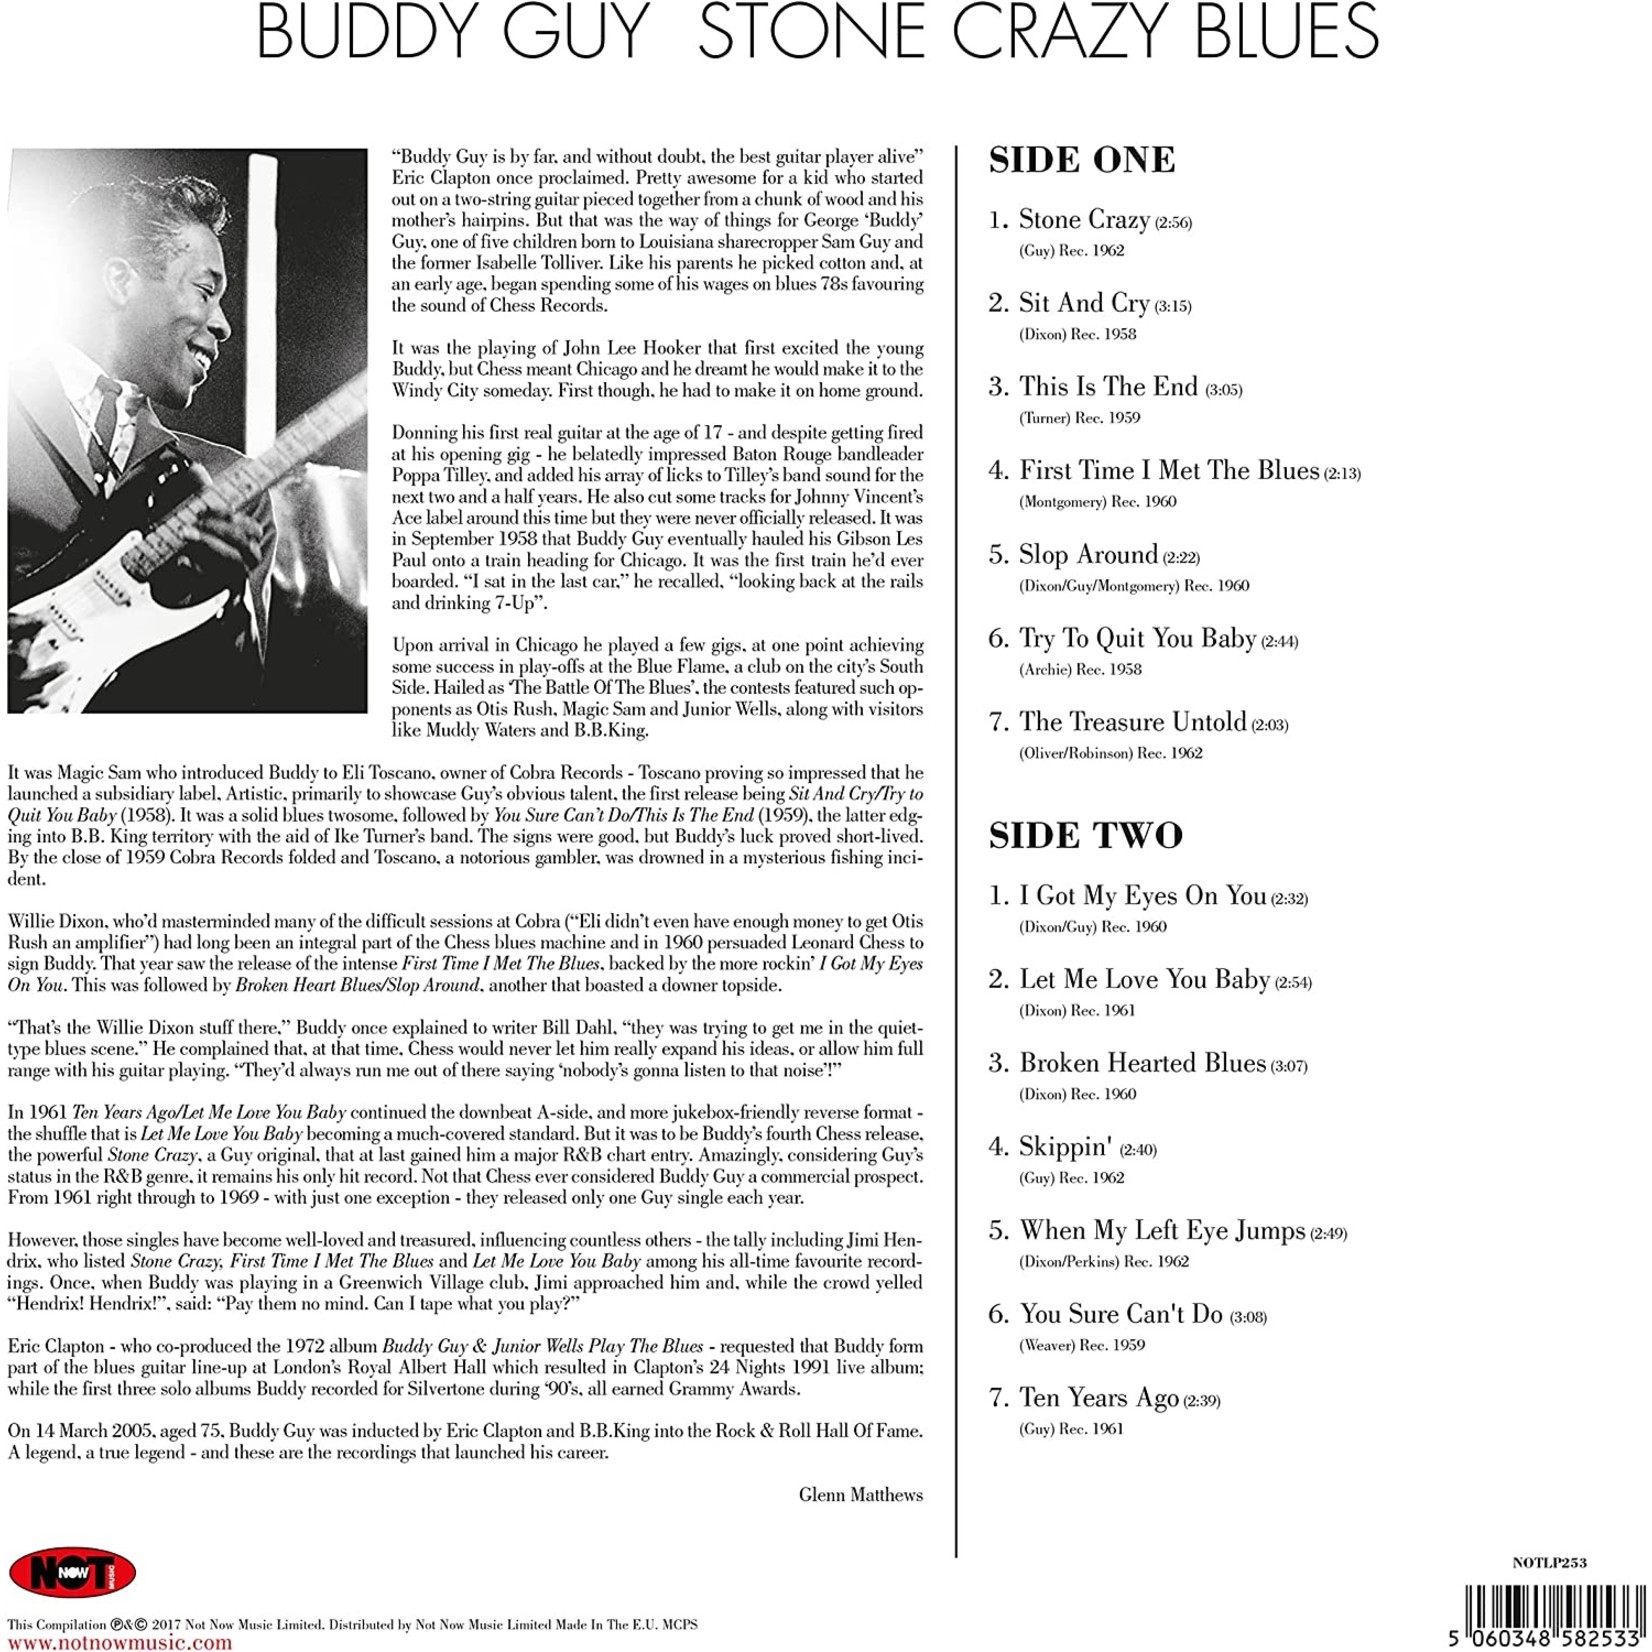 Buddy Guy - Stone Crazy Blues (Not Now Music) (180g) (Colored vinyl (blue))